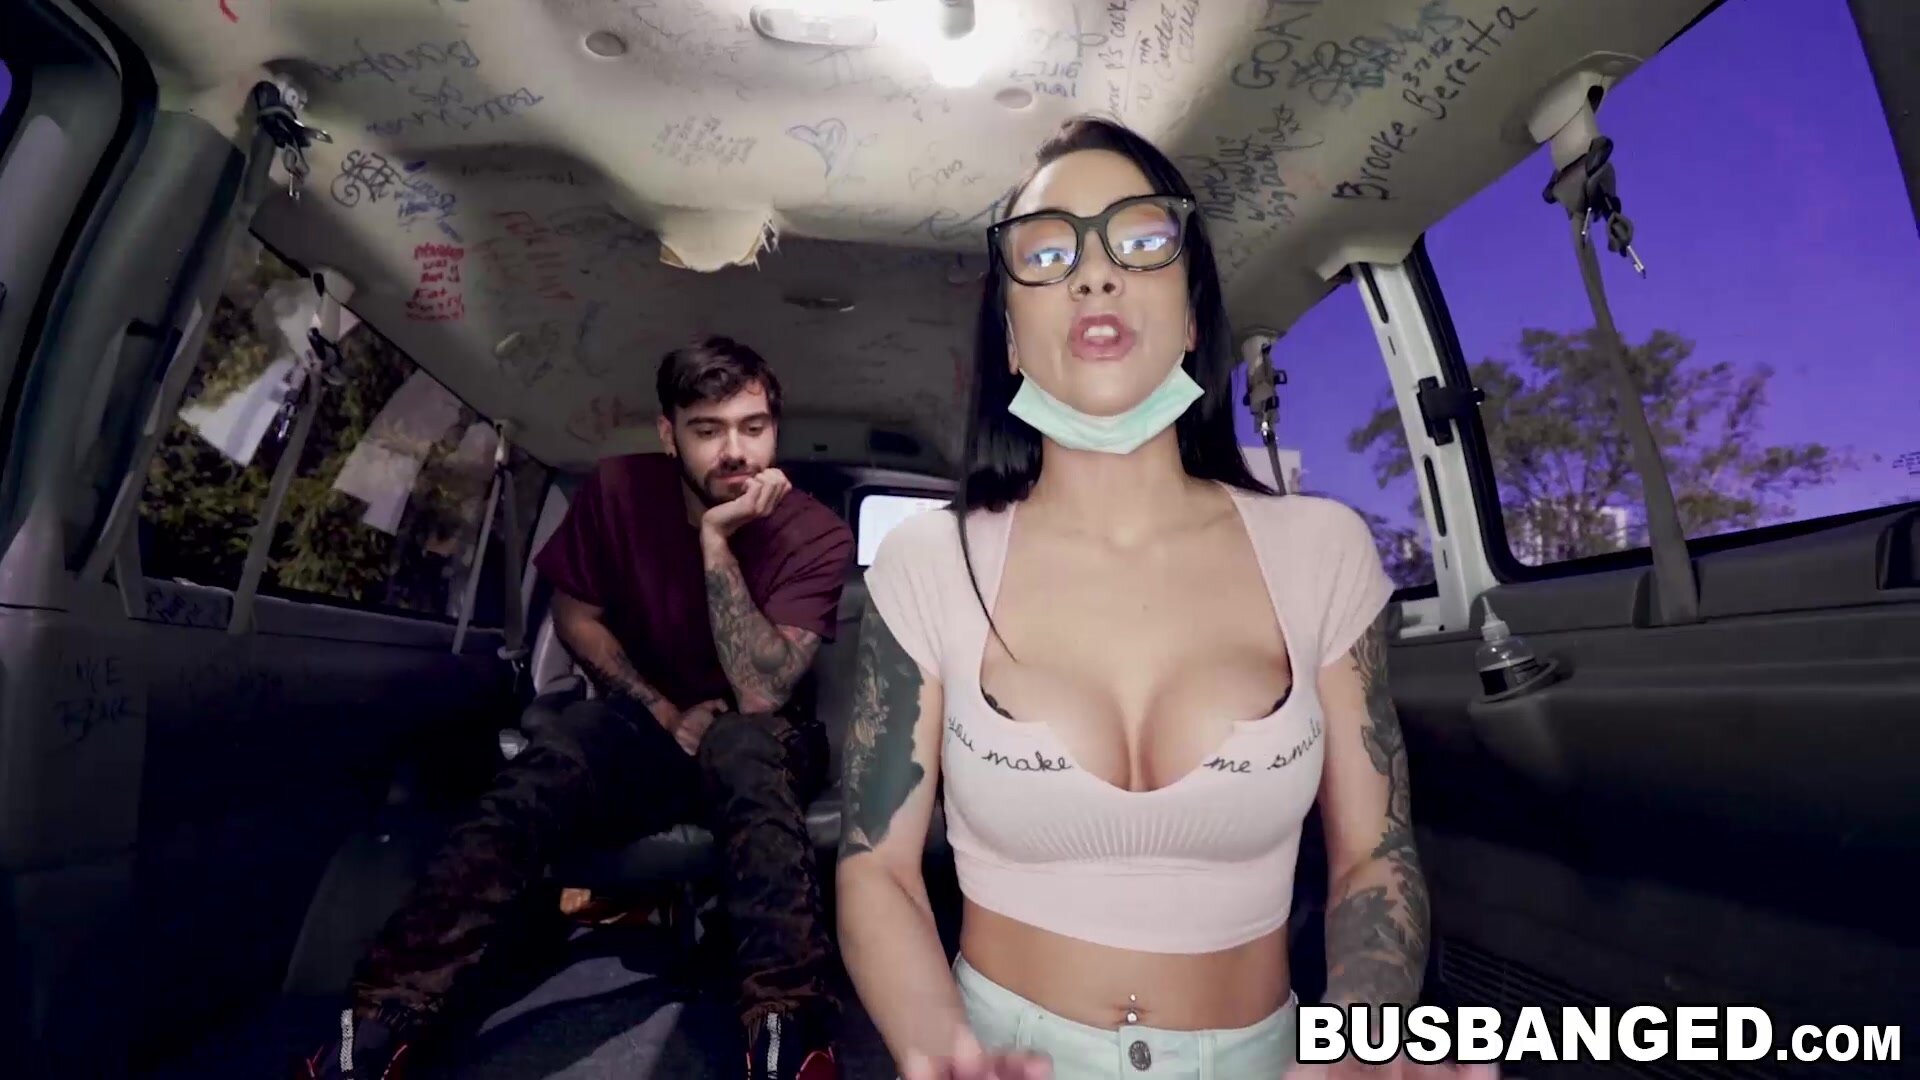 Tatted Sabrina Valentine tricked into BJ and car pic